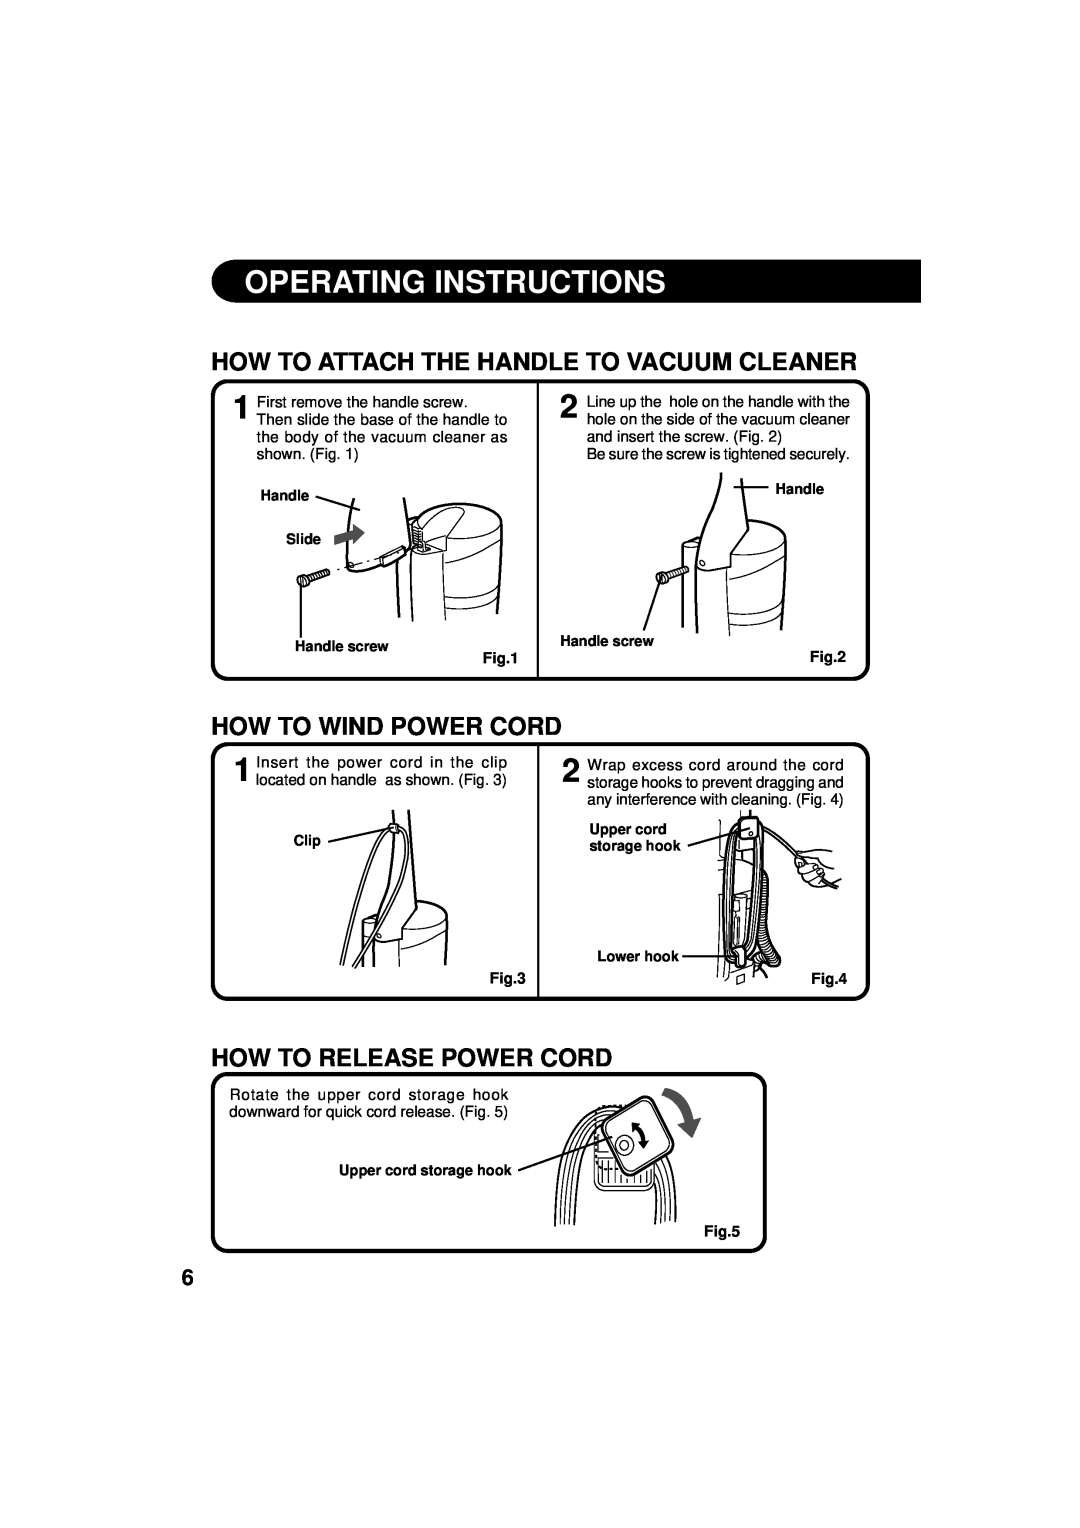 Sharp EC-S5170, EC-T5180 Operating Instructions, How To Attach The Handle To Vacuum Cleaner, How To Wind Power Cord 